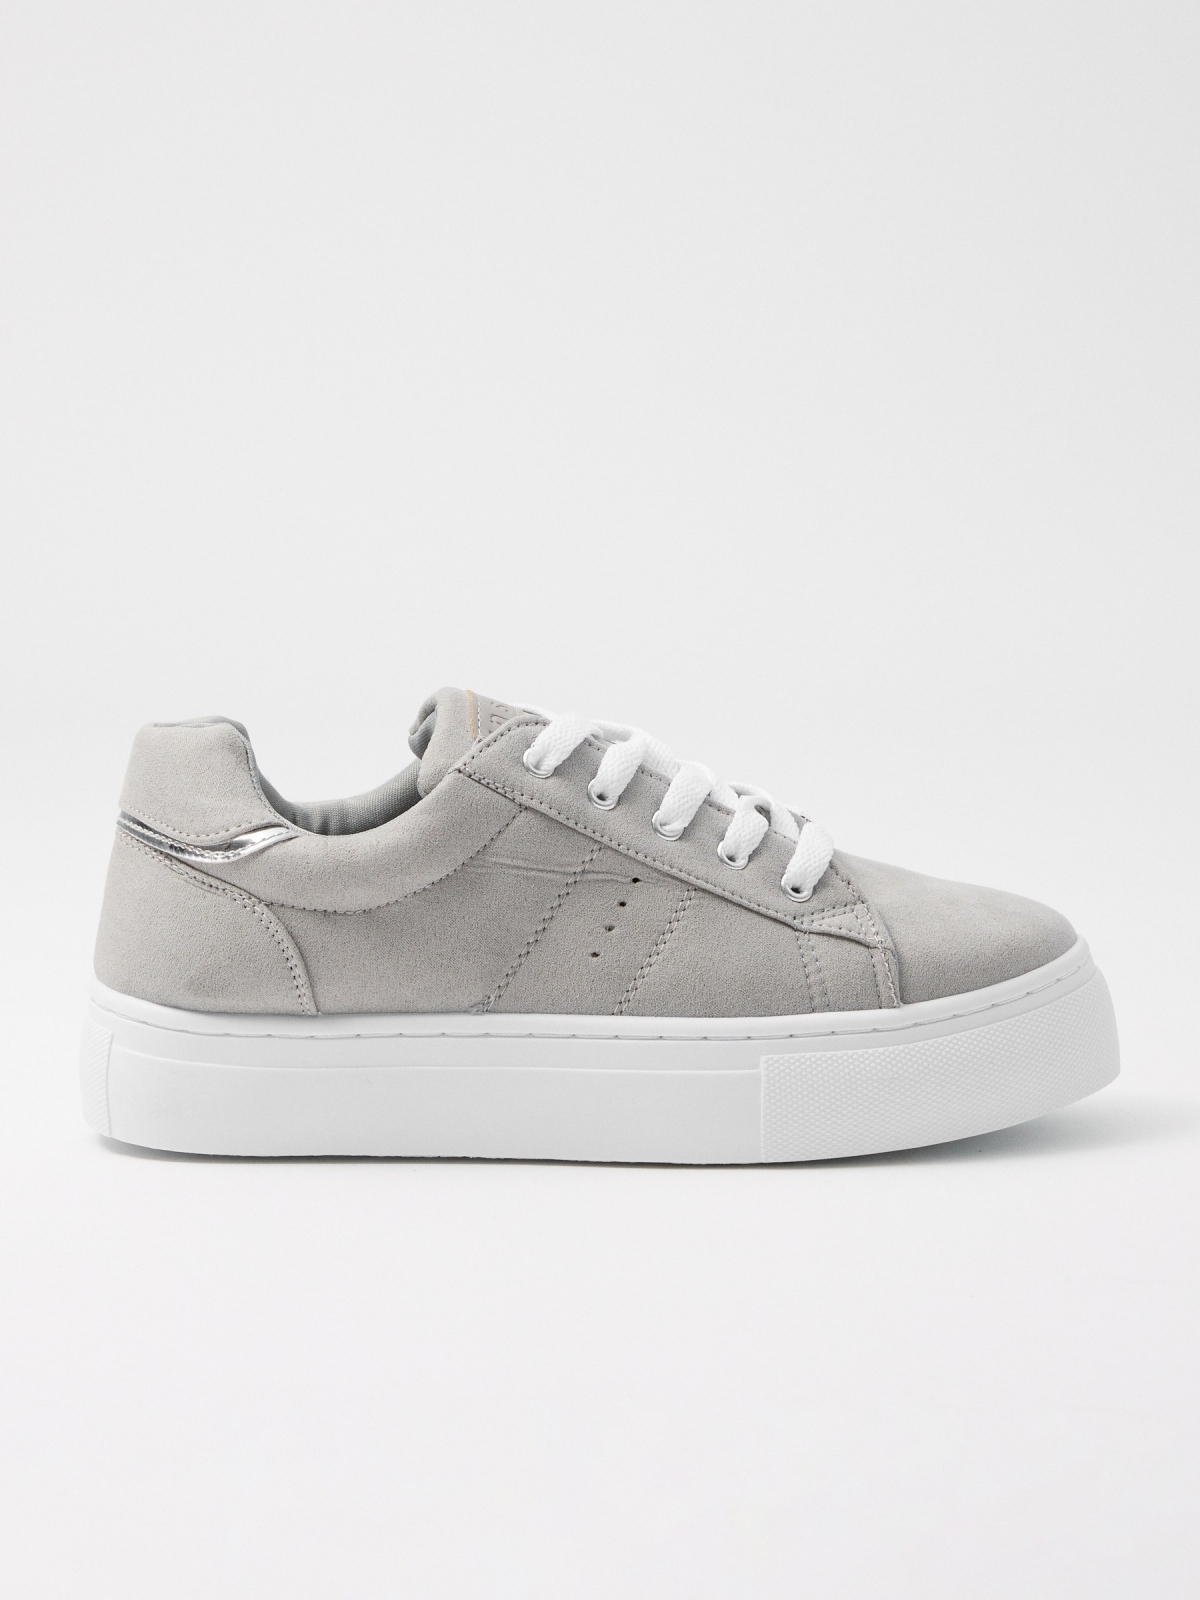 Deportiva casual con plataofmra gris